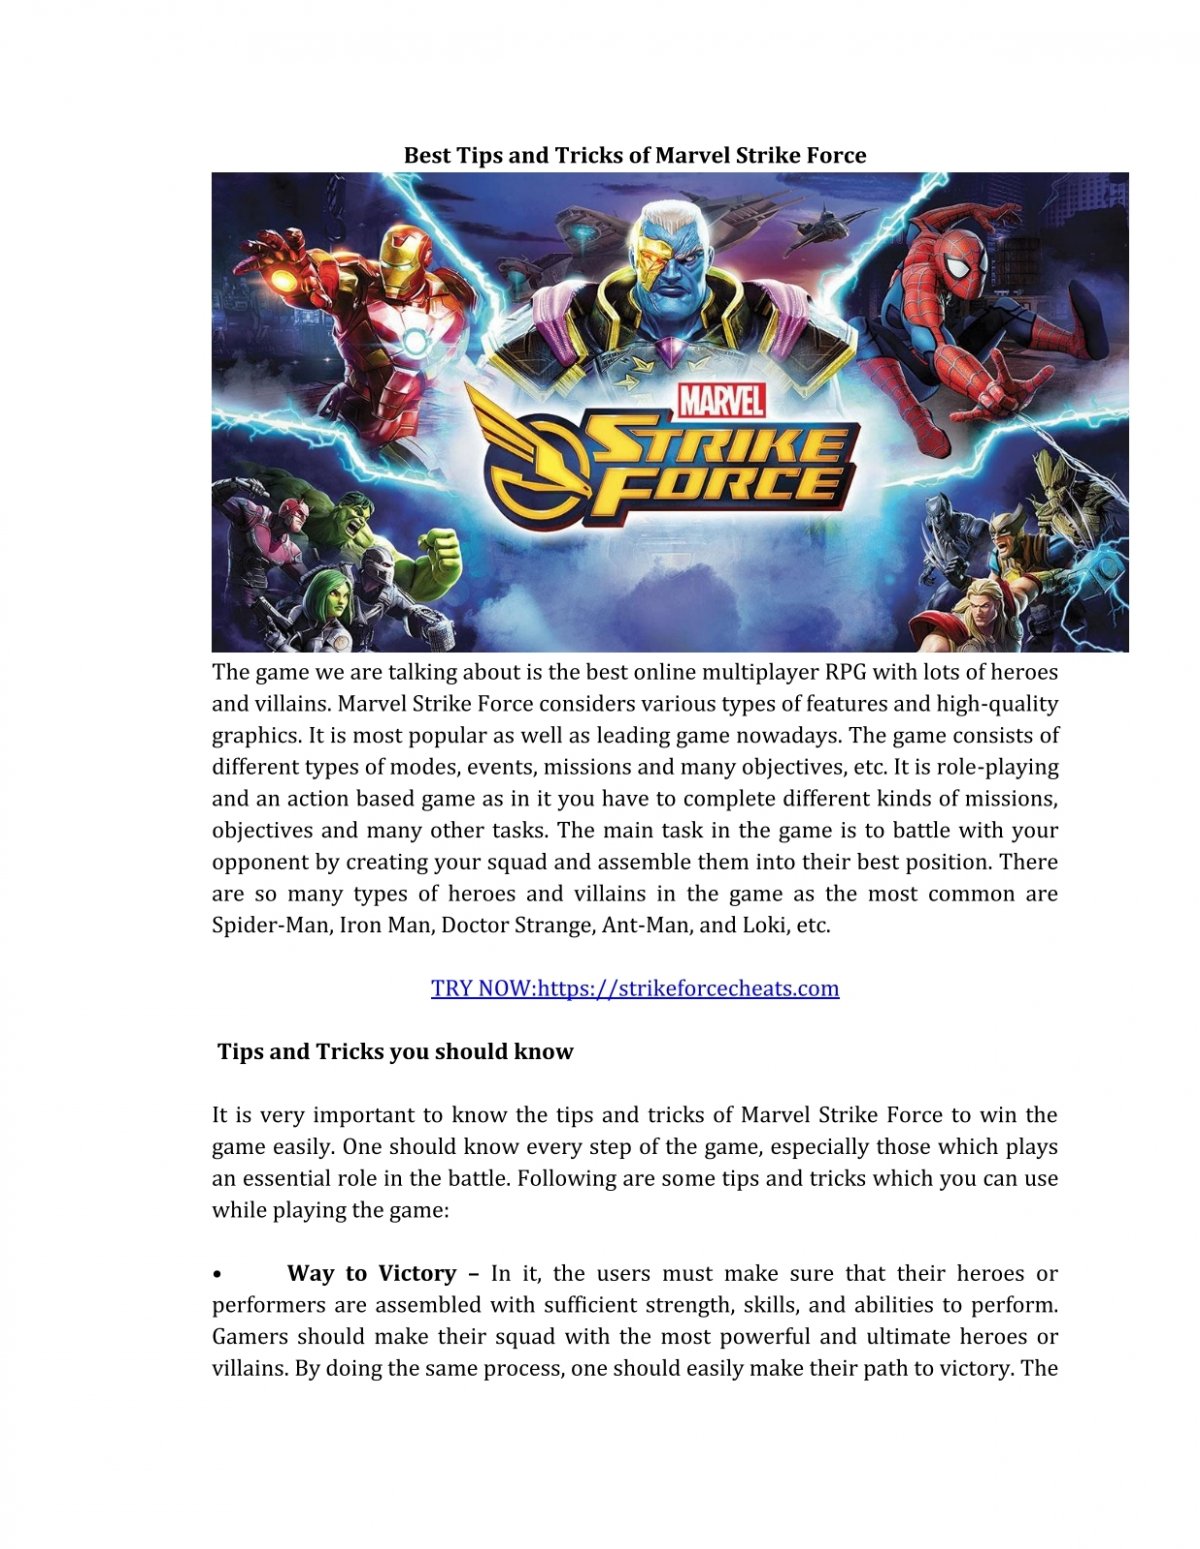 Marvel Strike Force Hack - Get Free Gold And Power Cores [Android